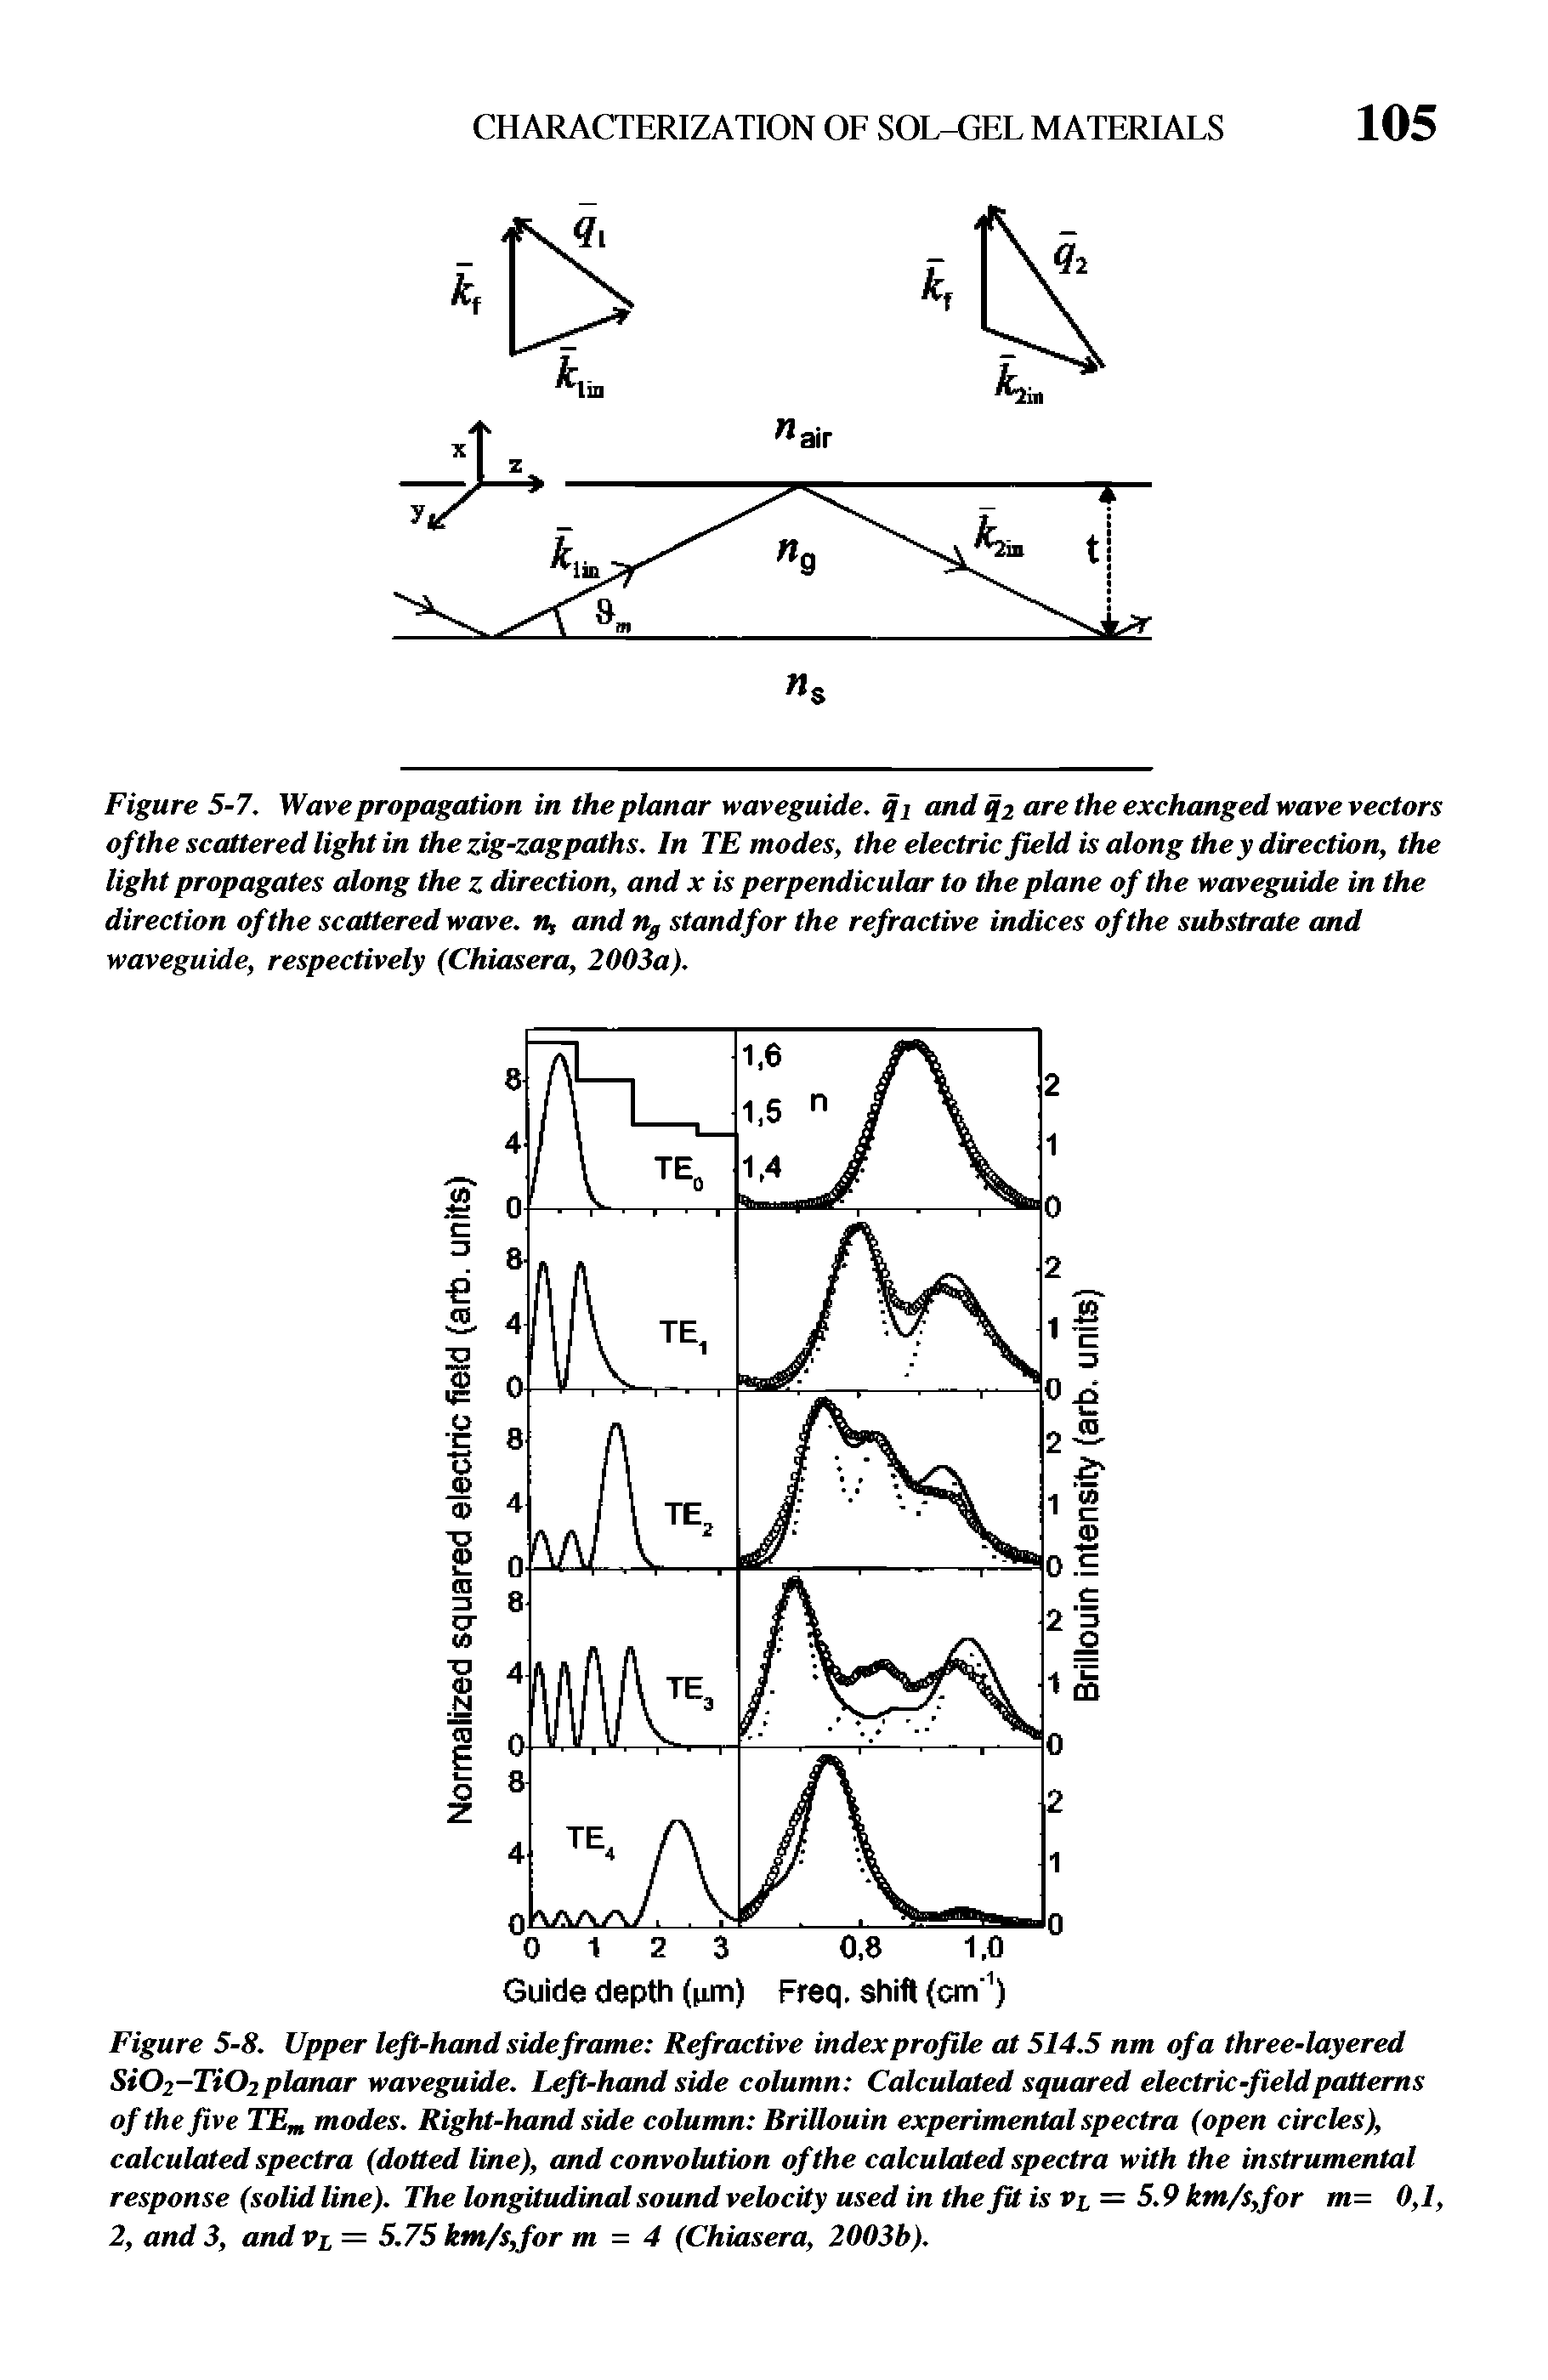 Figure 5-8. Upper left-hand side frame Refractive index profile at 514.5 nm of a three-layered Si02-Ti02 planar waveguide. Left-hand side column Calculated squared electric-field patterns of the five TE modes. Right-hand side column BriUouin experimental spectra (open circles), calculated spectra (dotted line), and convolution of the calculated spectra with the instrumental response (solid line). The longitudinal sound velocity used in the fit is vi = 5.9 km/s,for m= 0,1, 2, and 3, and Pl = 5.75 km/sjbr m = 4 (Chiasera, 2003b).